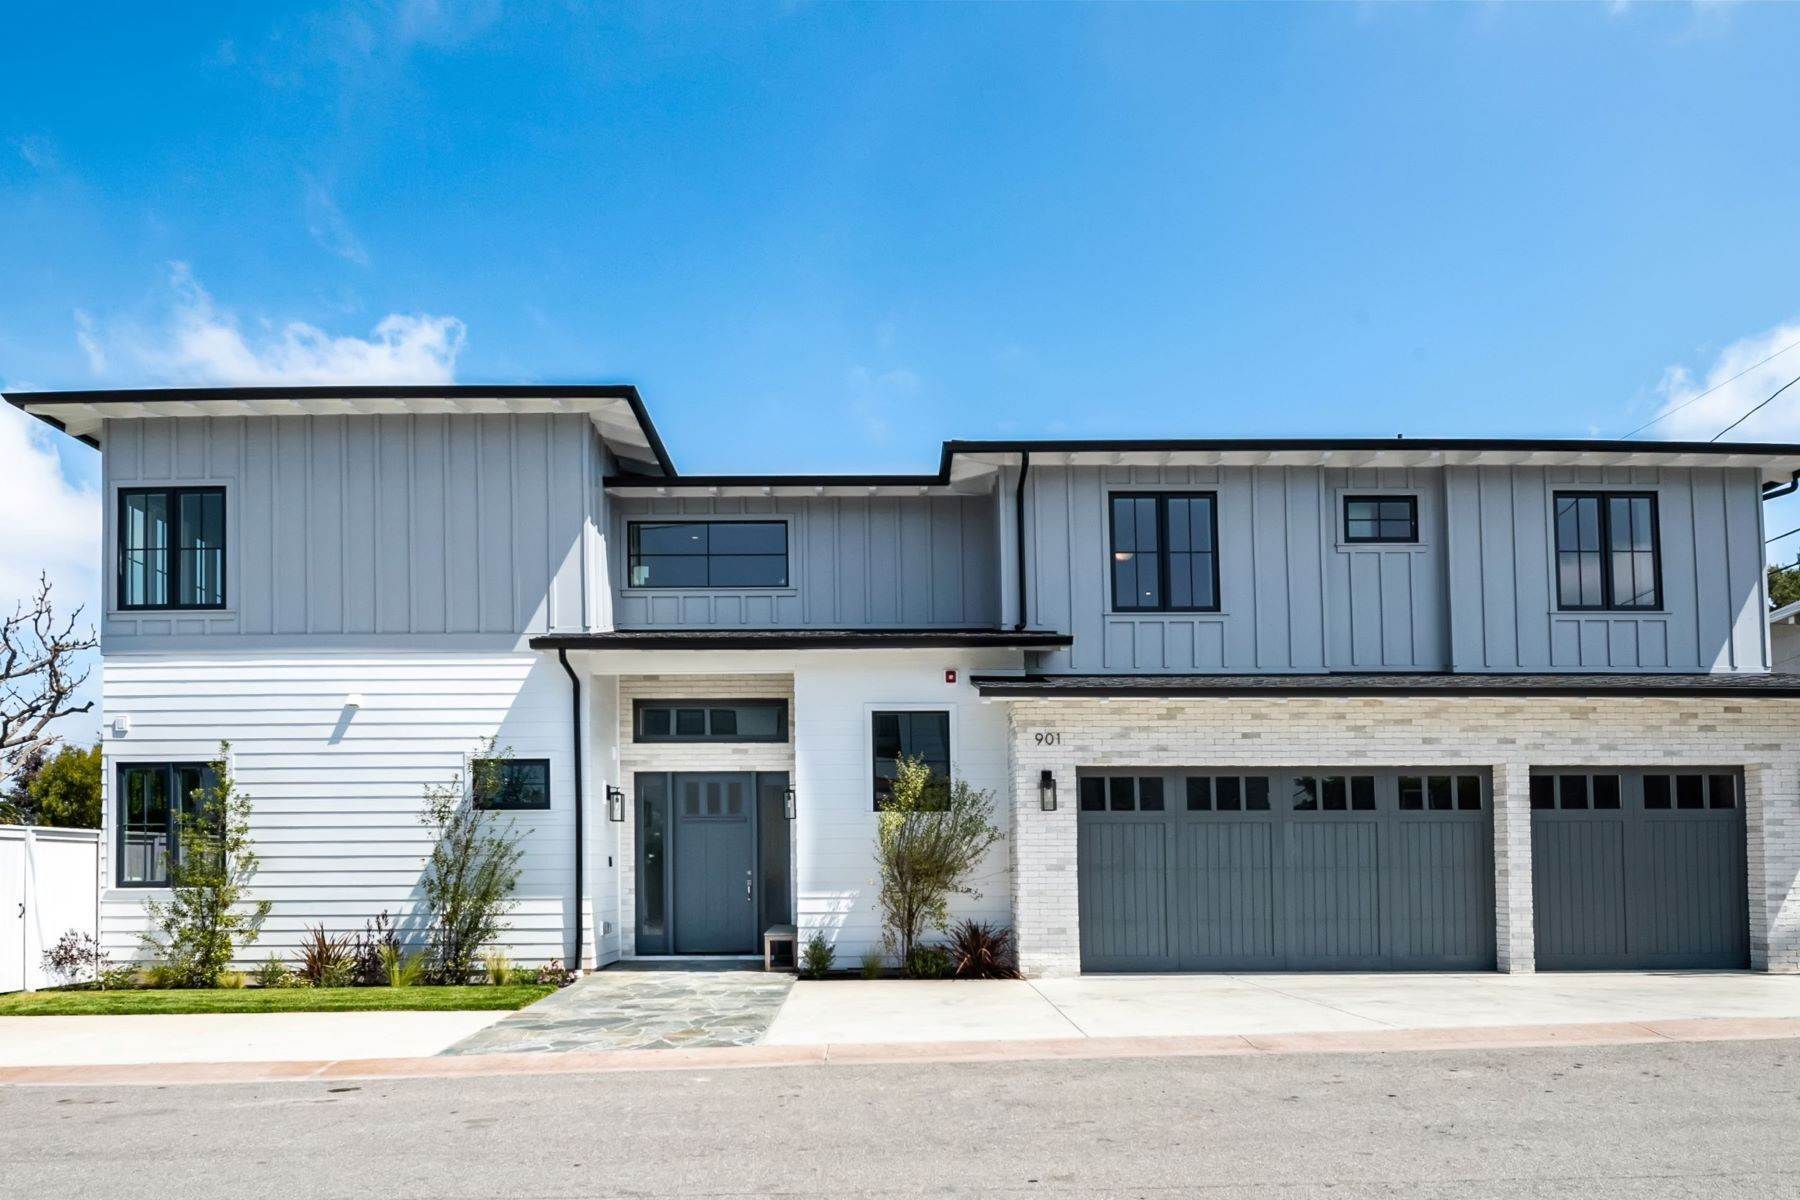 Single Family Homes for Sale at 901 28th Street, Manhattan Beach, CA 90266 901 28th Street, Manhattan Beach, CA 90266, Manhattan Beach, California 90266 United States